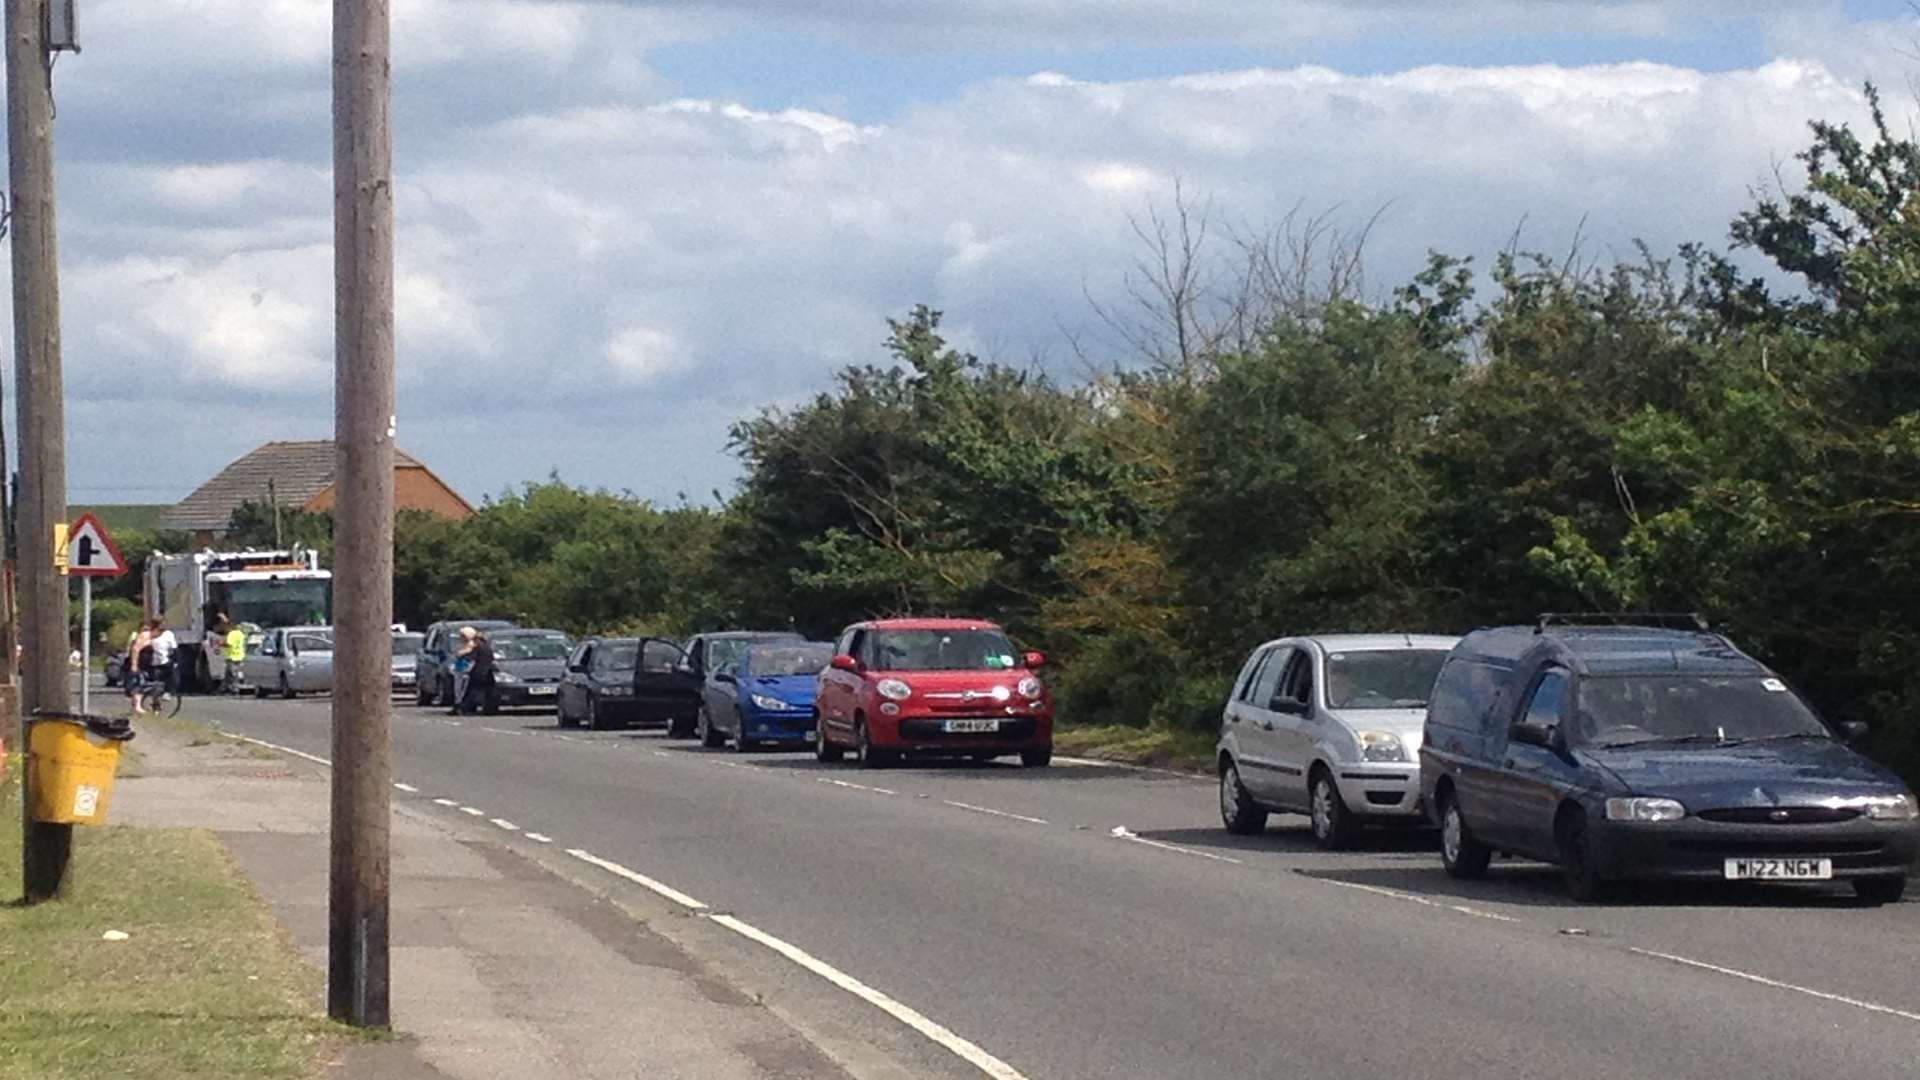 A queue of traffic as emergency services deal with the crash